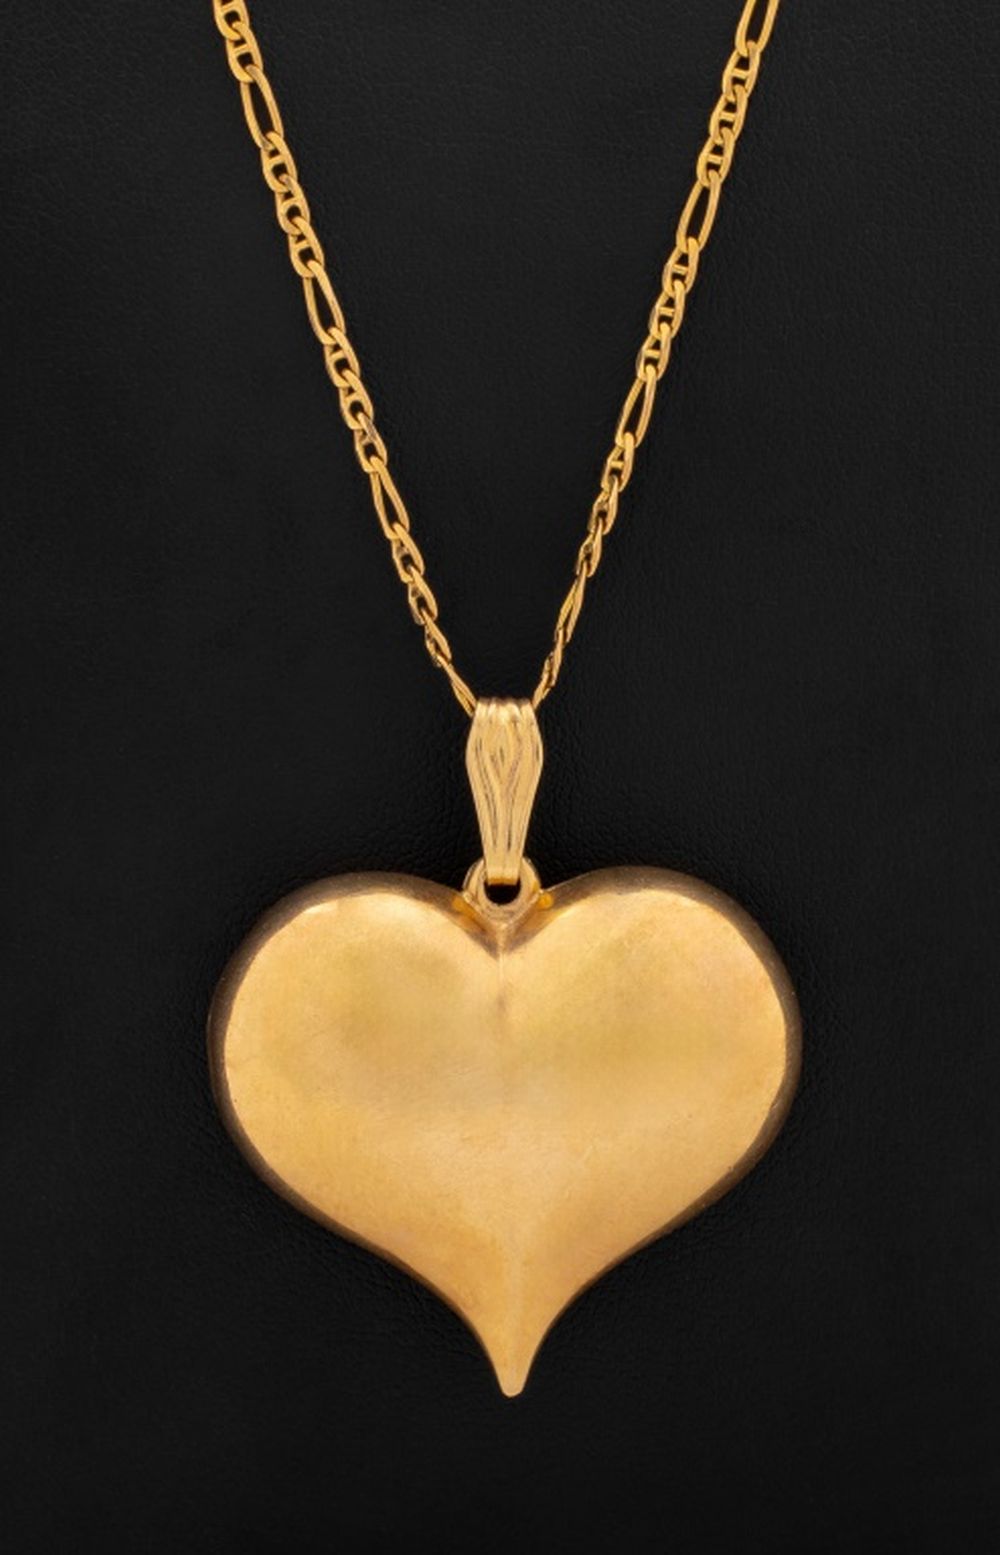 14K YELLOW GOLD HEART PENDANT NECKLACE